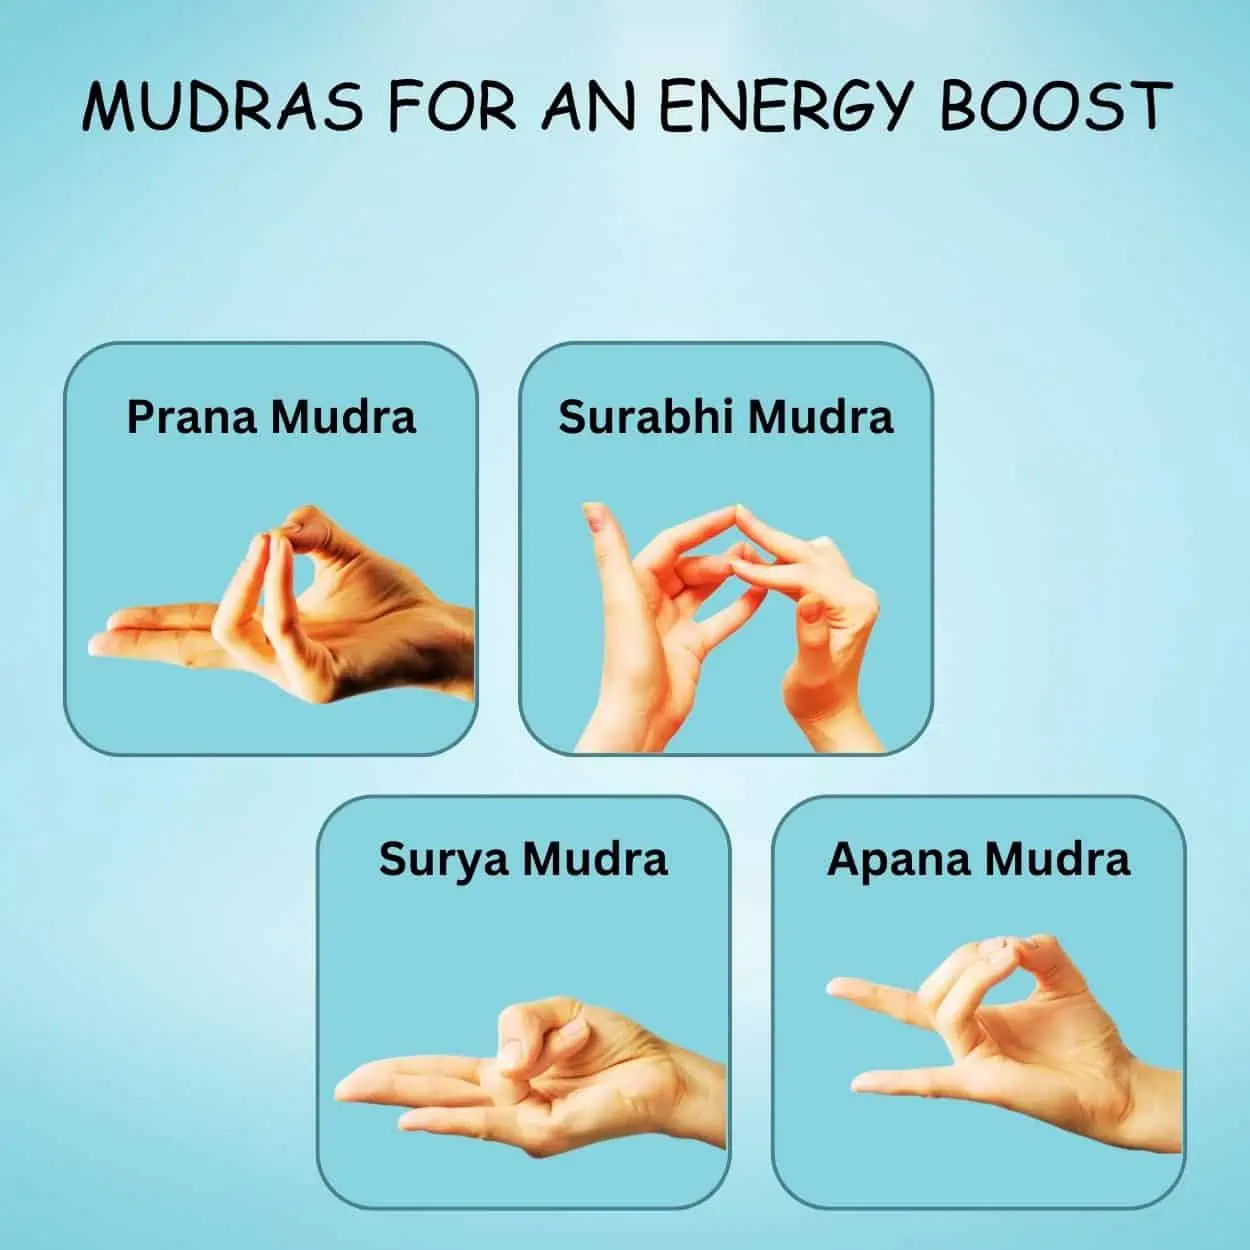 Mudras for an Energy Boost